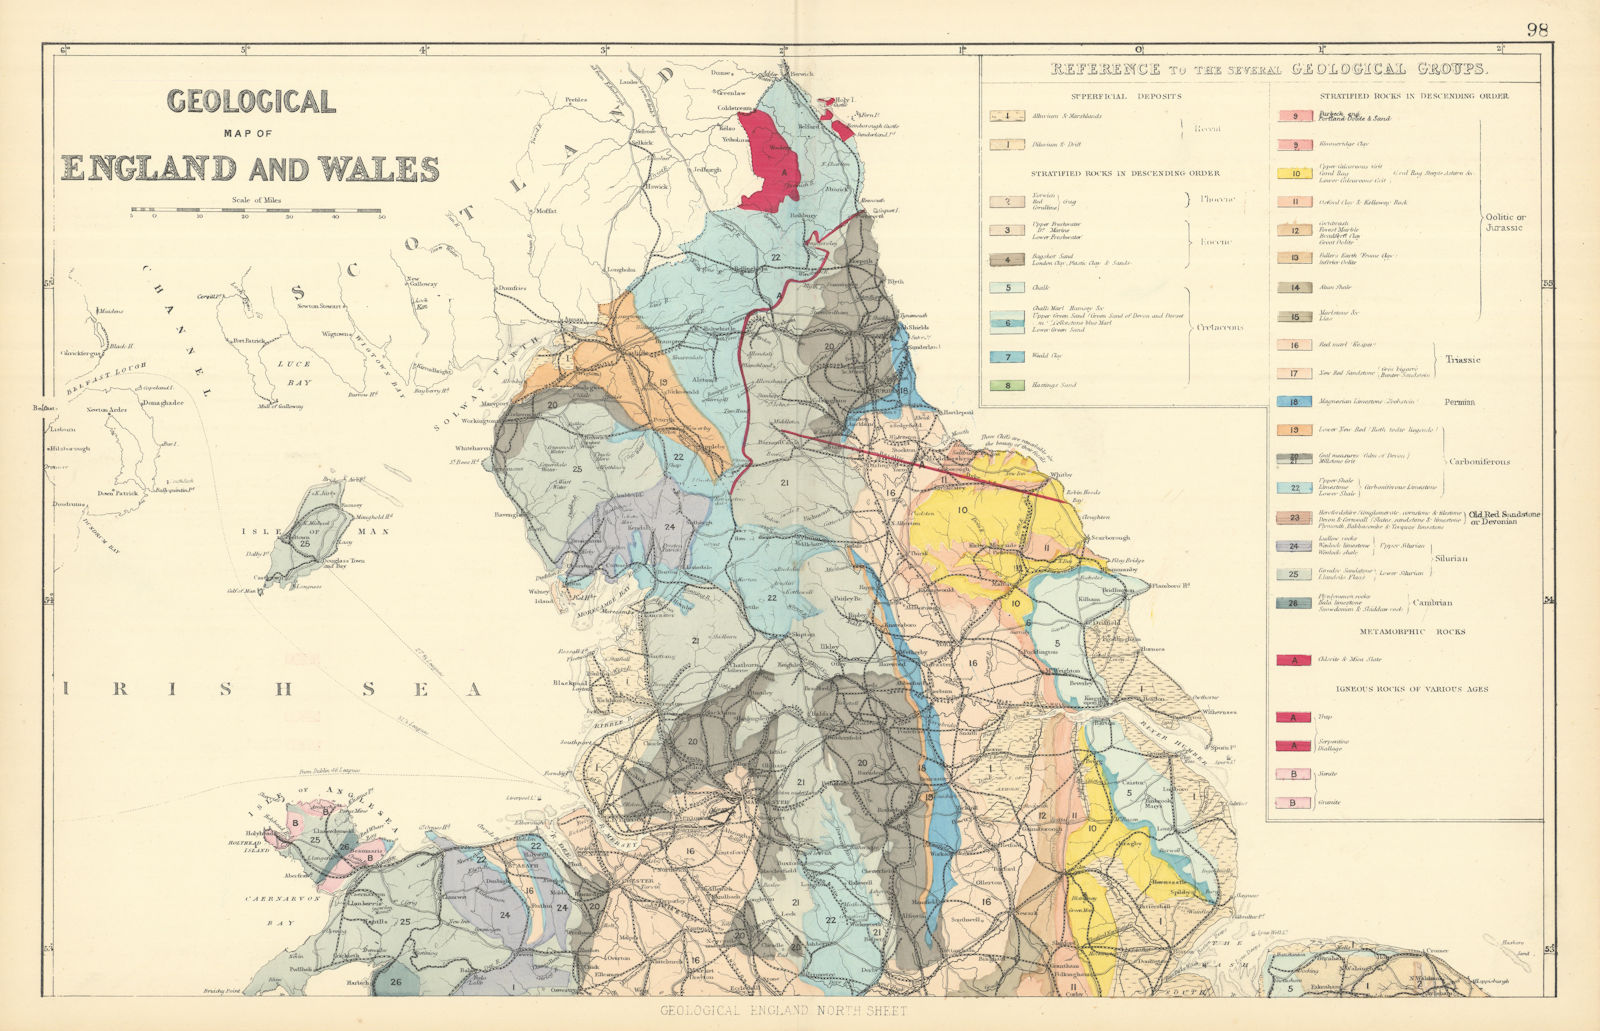 GEOLOGICAL ENGLAND & WALES (North sheet) antique map by GW BACON 1891 old